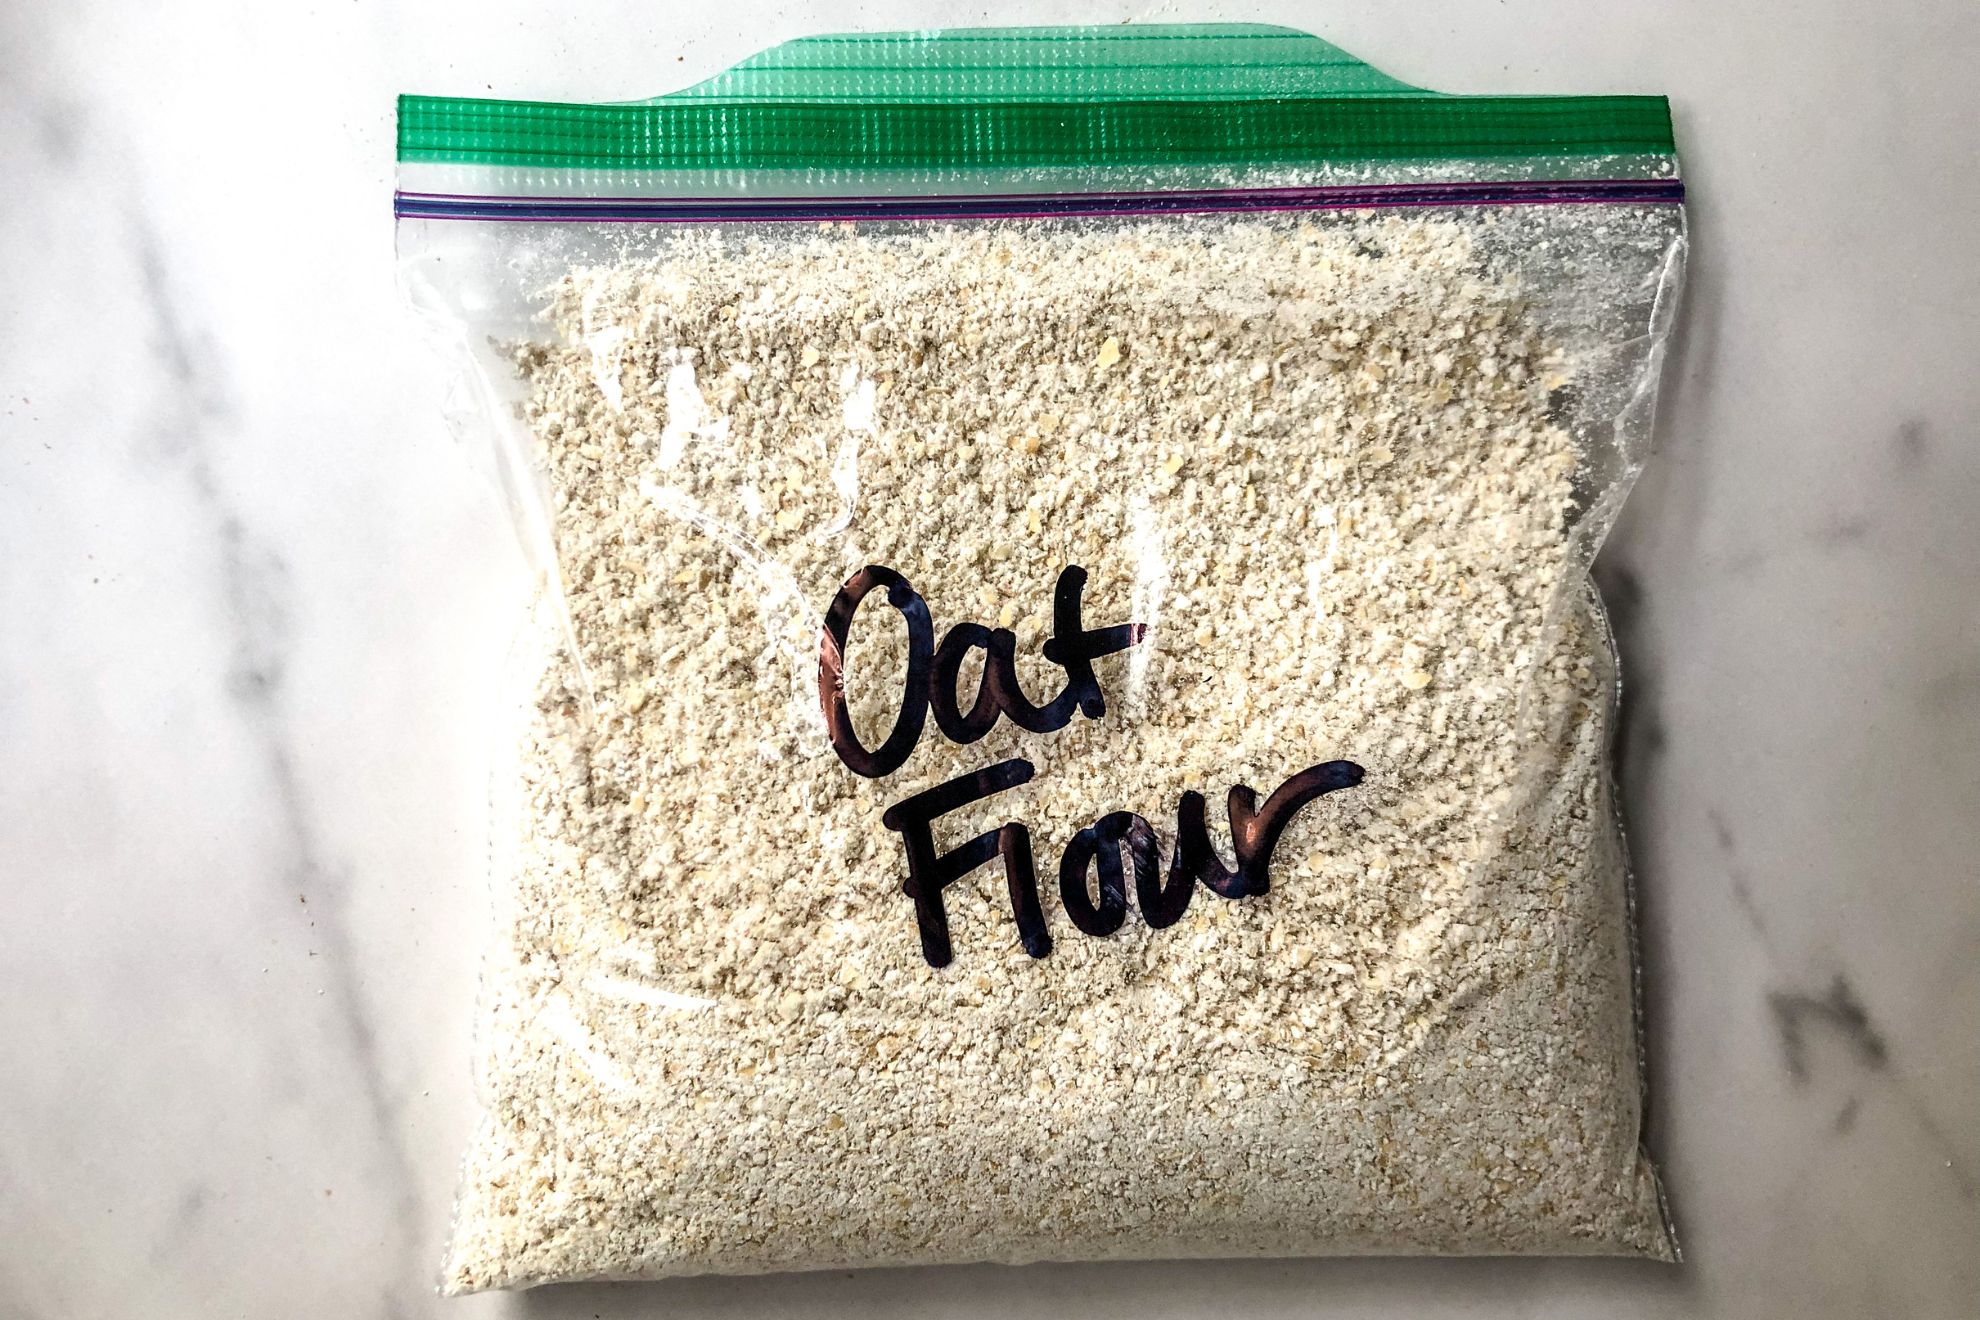 This is an overhead image looking onto a plastic baggie filled with oat flour. "Oat Flour" is written on the baggie in black sharpie. The bag lays on a white marble surface.